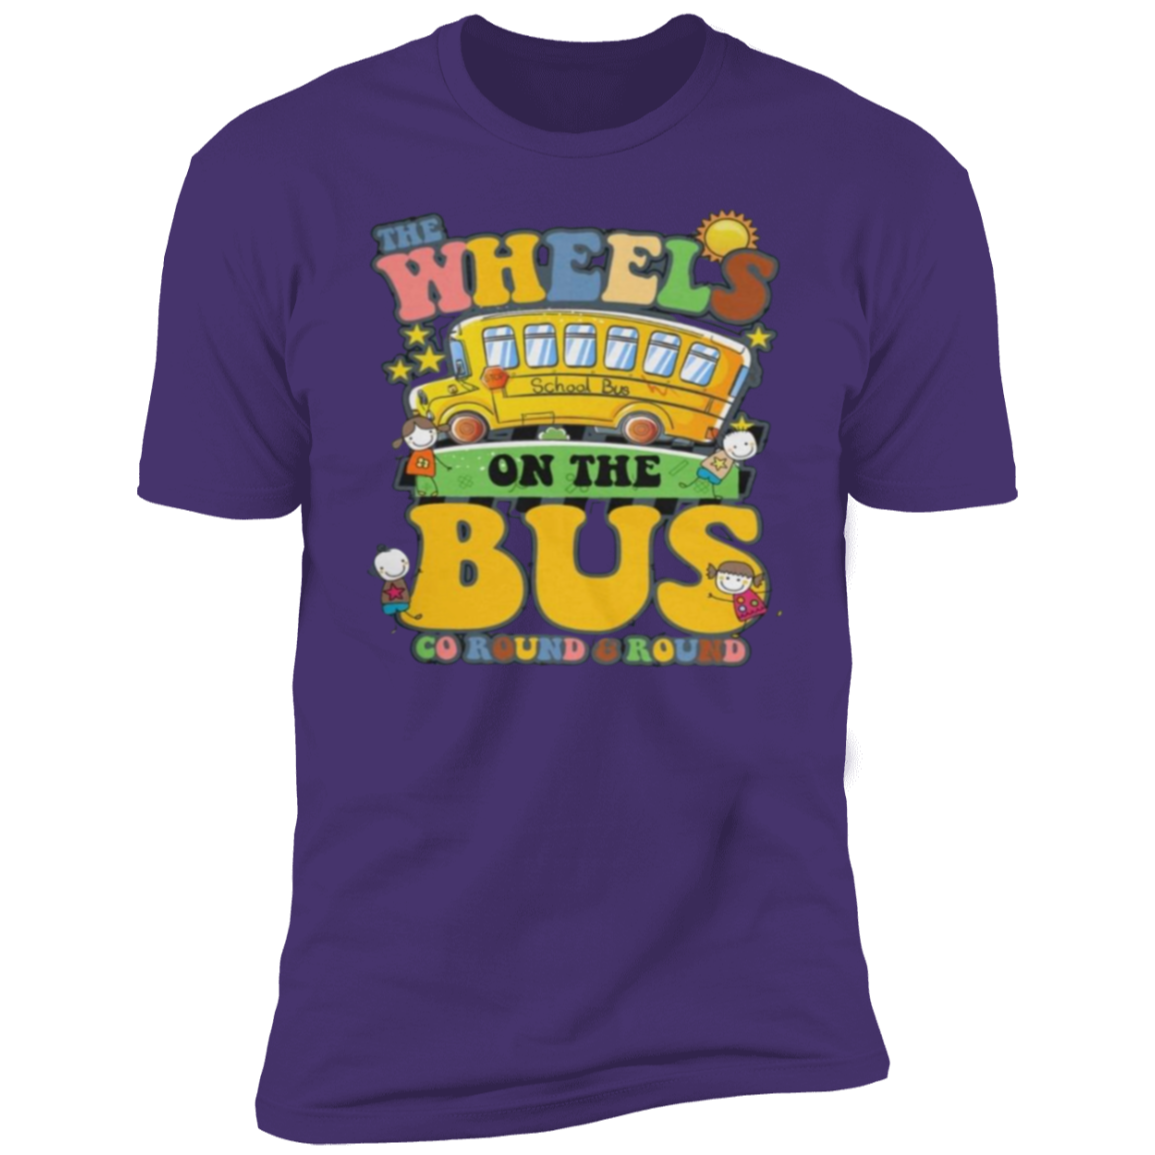 The Wheels on the Bus Tee